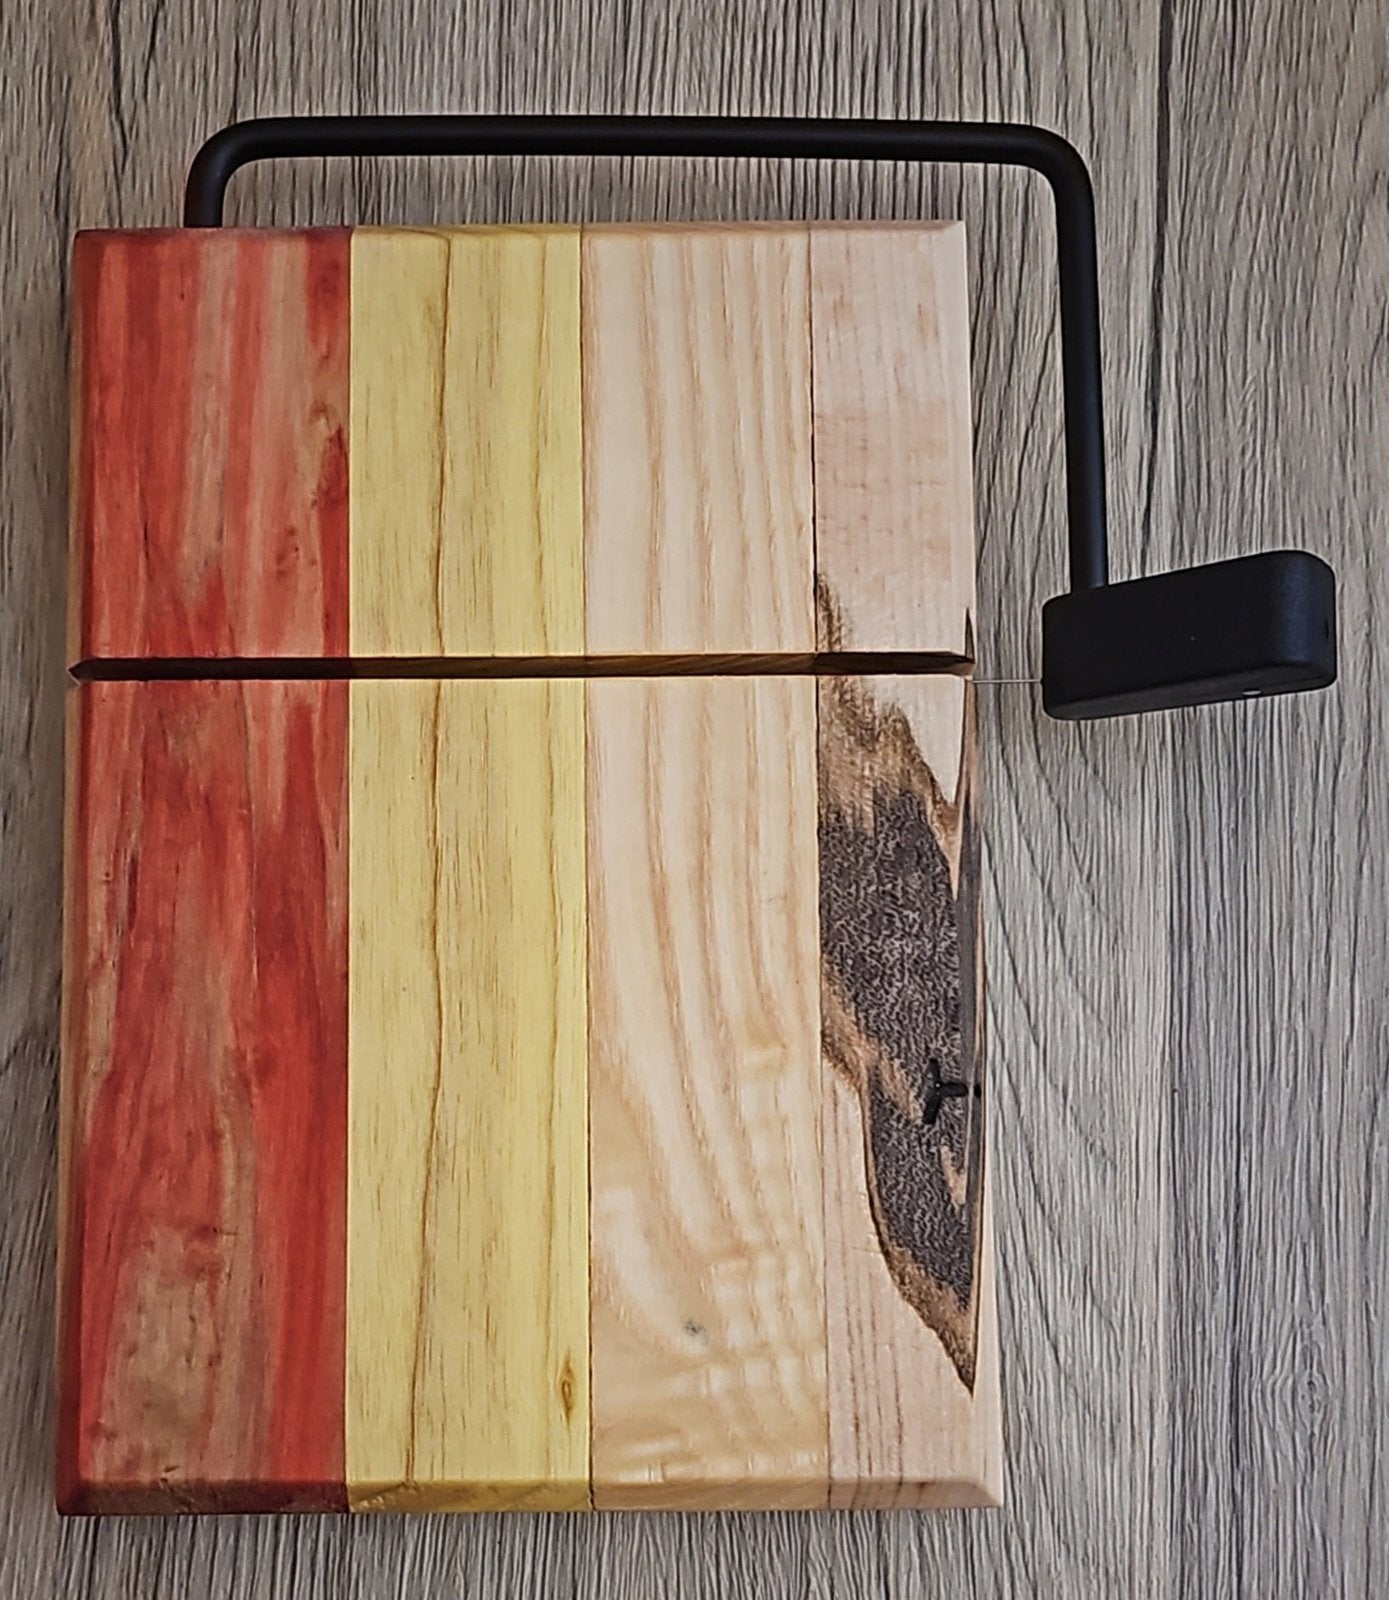 Box Elder, Mulberry, Hickory, and Maple Cheese Slicer Board